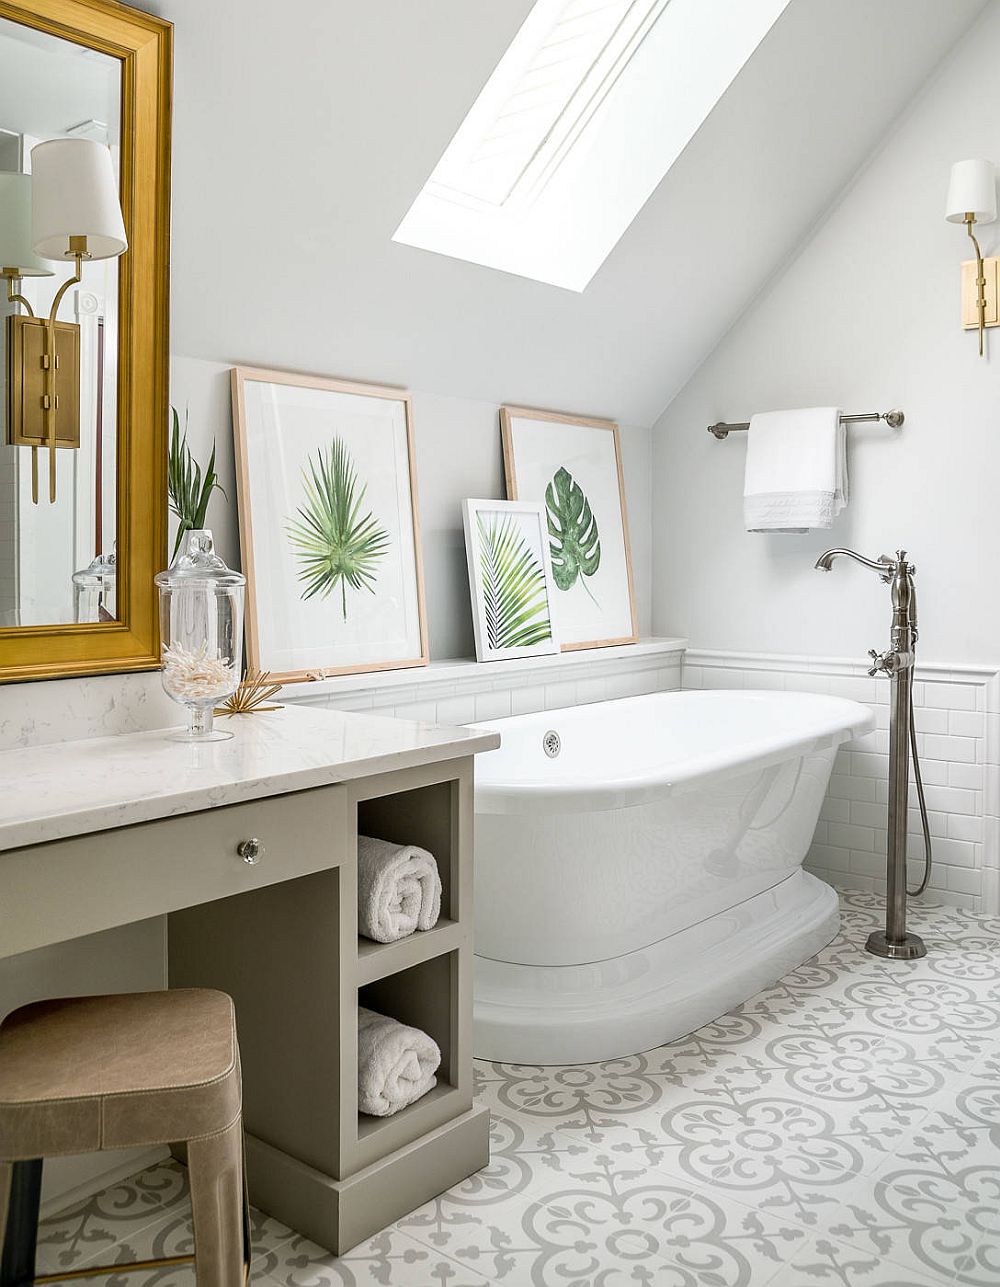 Brilliant use of framed botanicals on a ledge next to the freestanding bathtub in the revamped attic bathroom